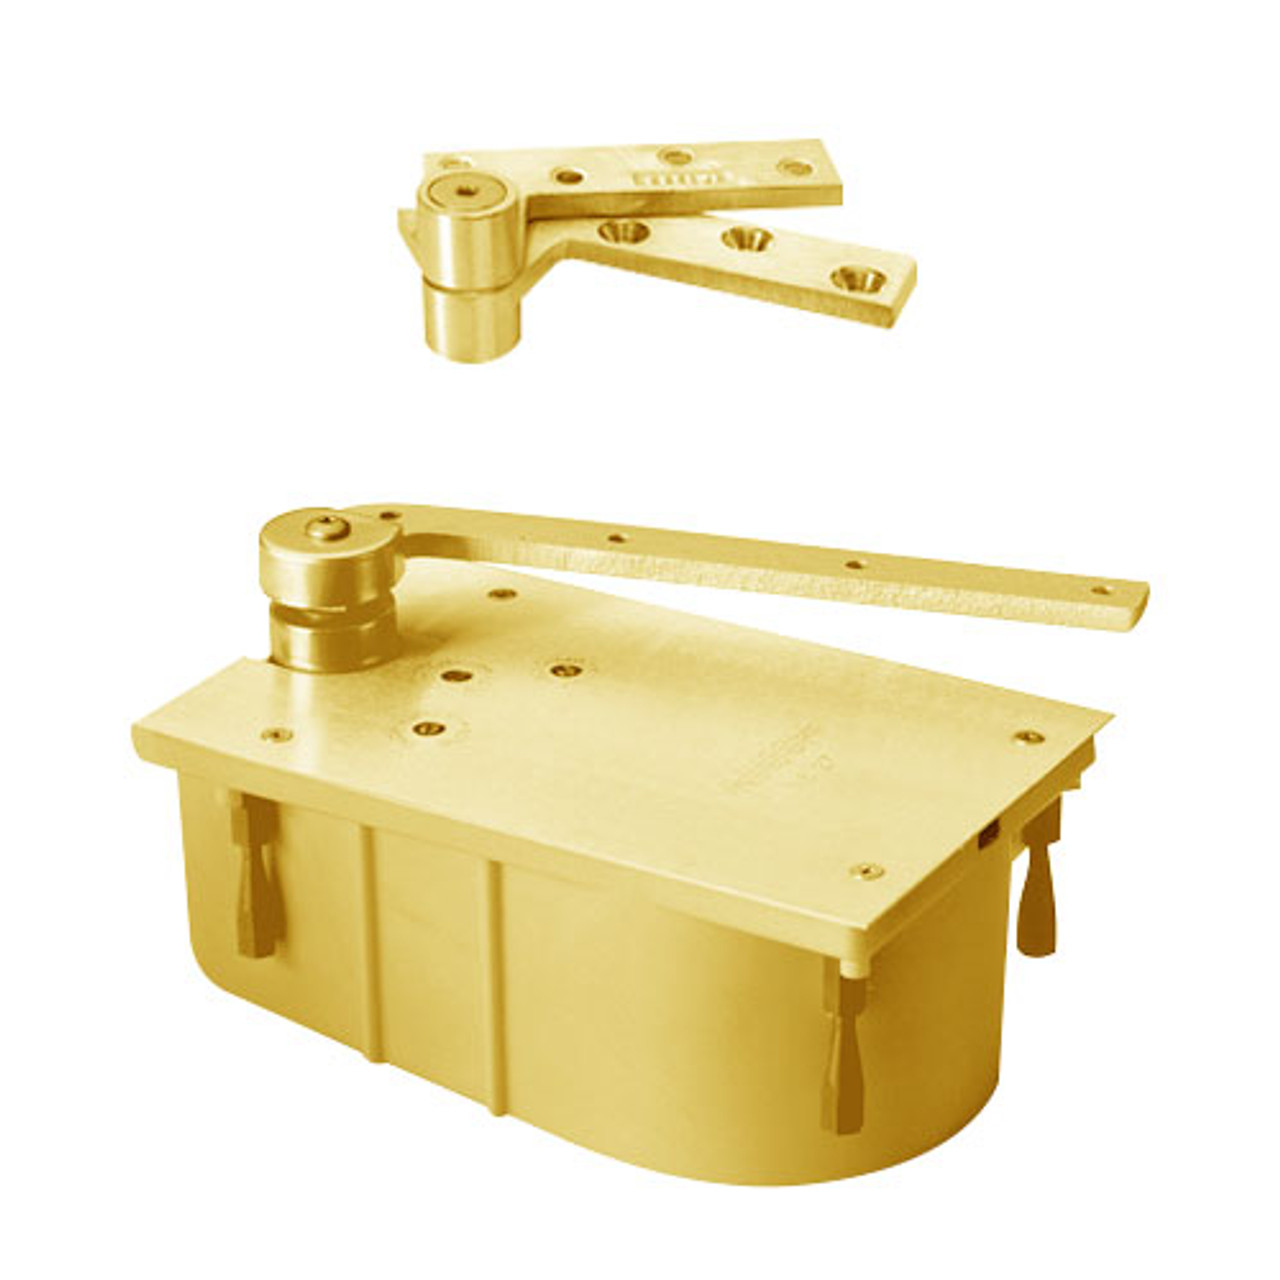 127-90N-LH-605 Rixson 127 Series Heavy Duty 3/4" Offset Hung Floor Closer in Bright Brass Finish